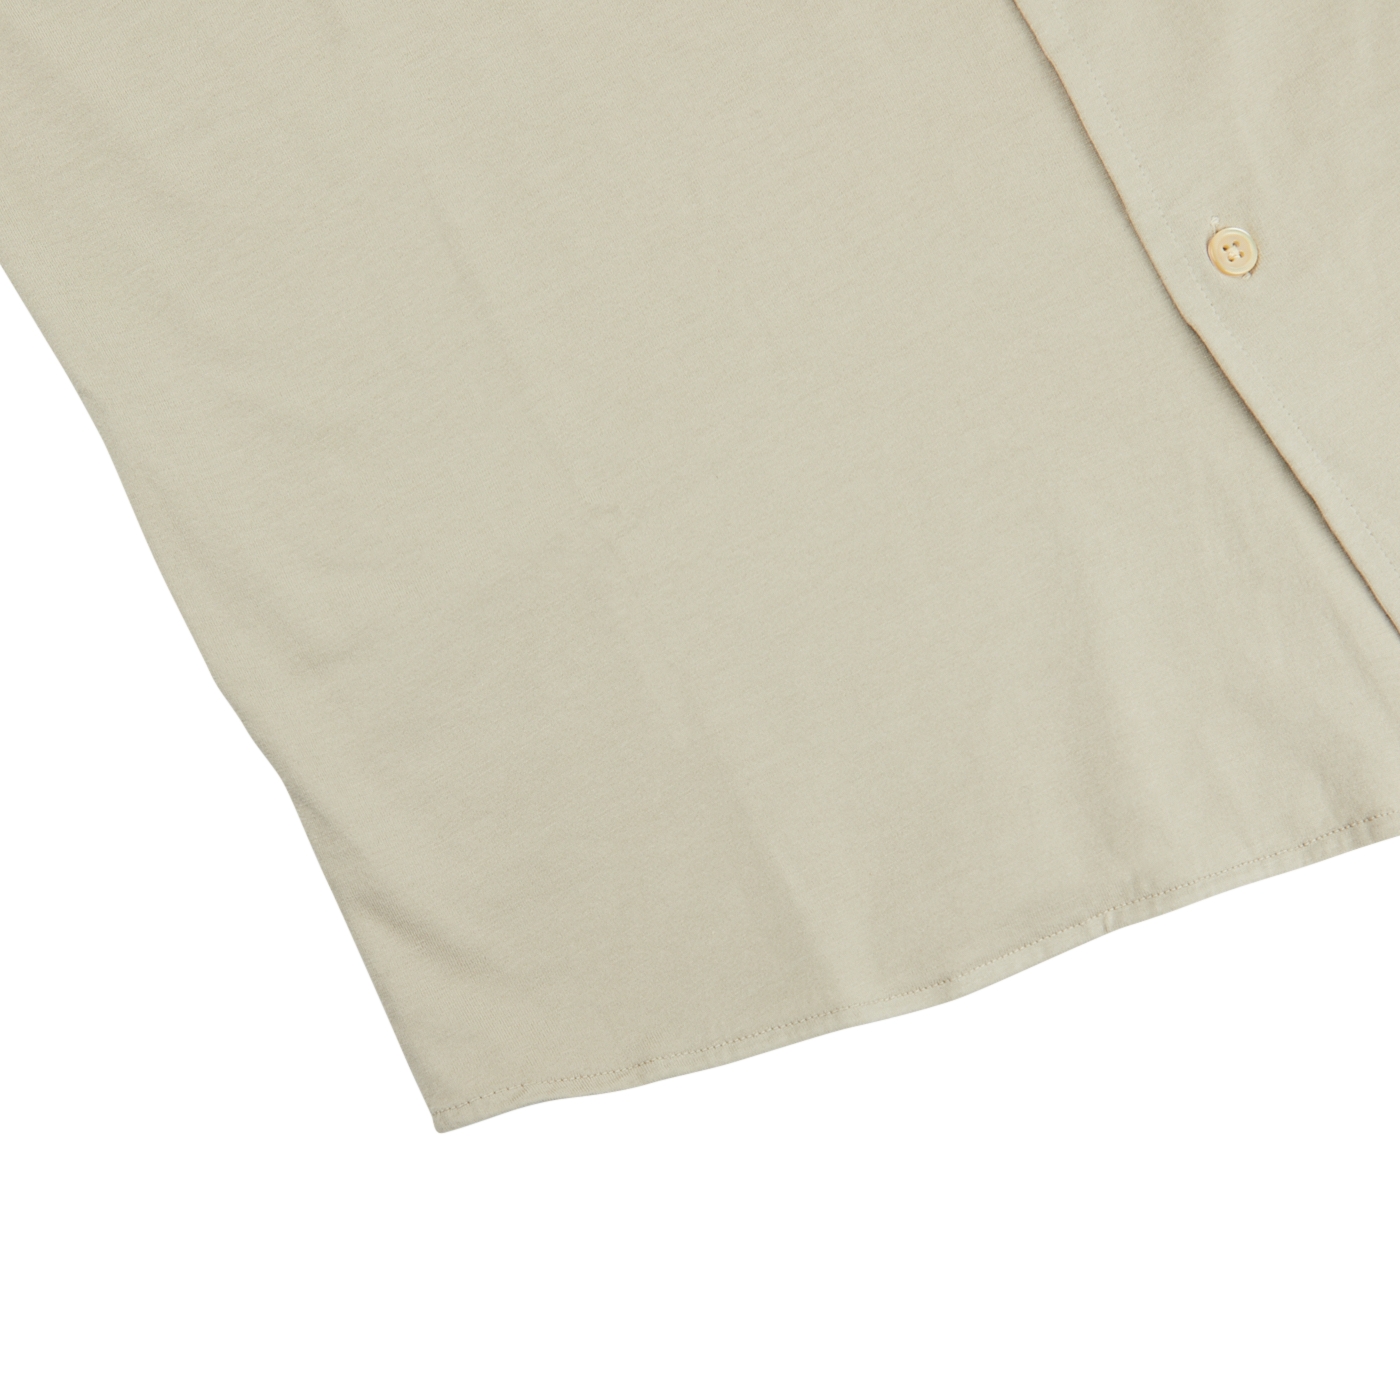 A Ciottollo Beige Cotton Jersey Knitted Shirt by Filippo de Laurentiis on a white surface.